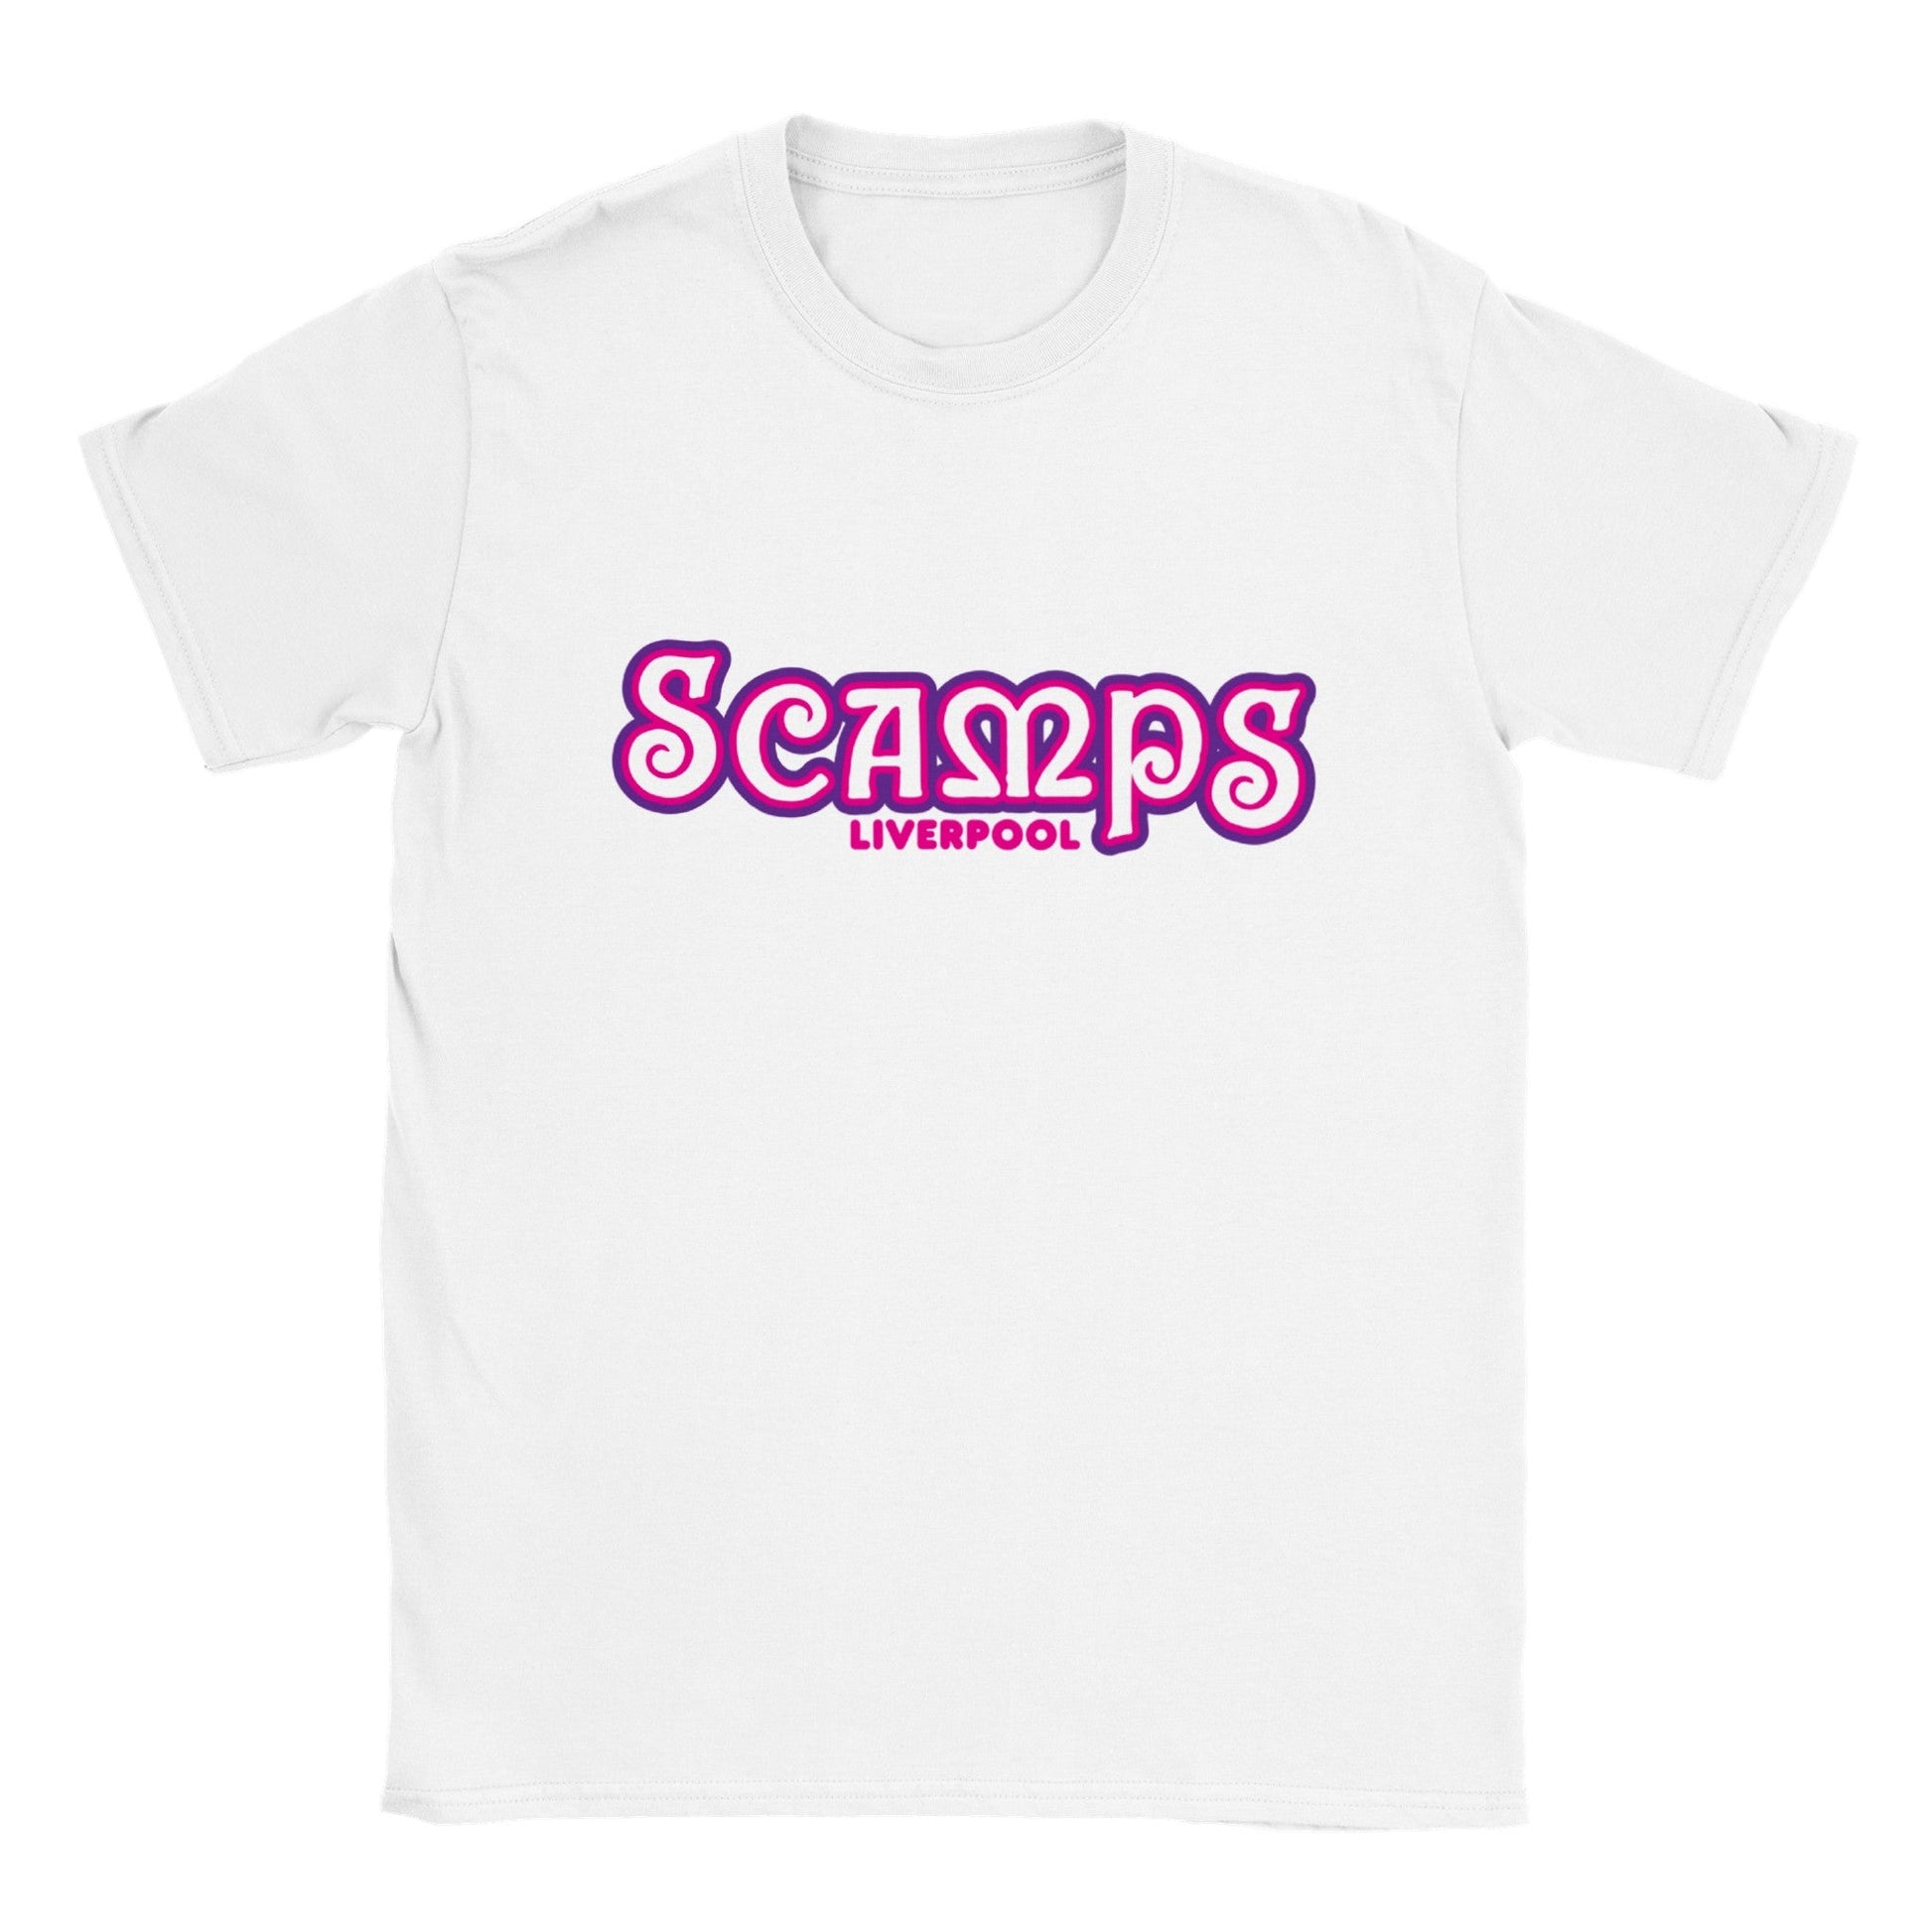 Scamps - Liverpool - unisex T-shirt - various colours - Dirty Stop Outs